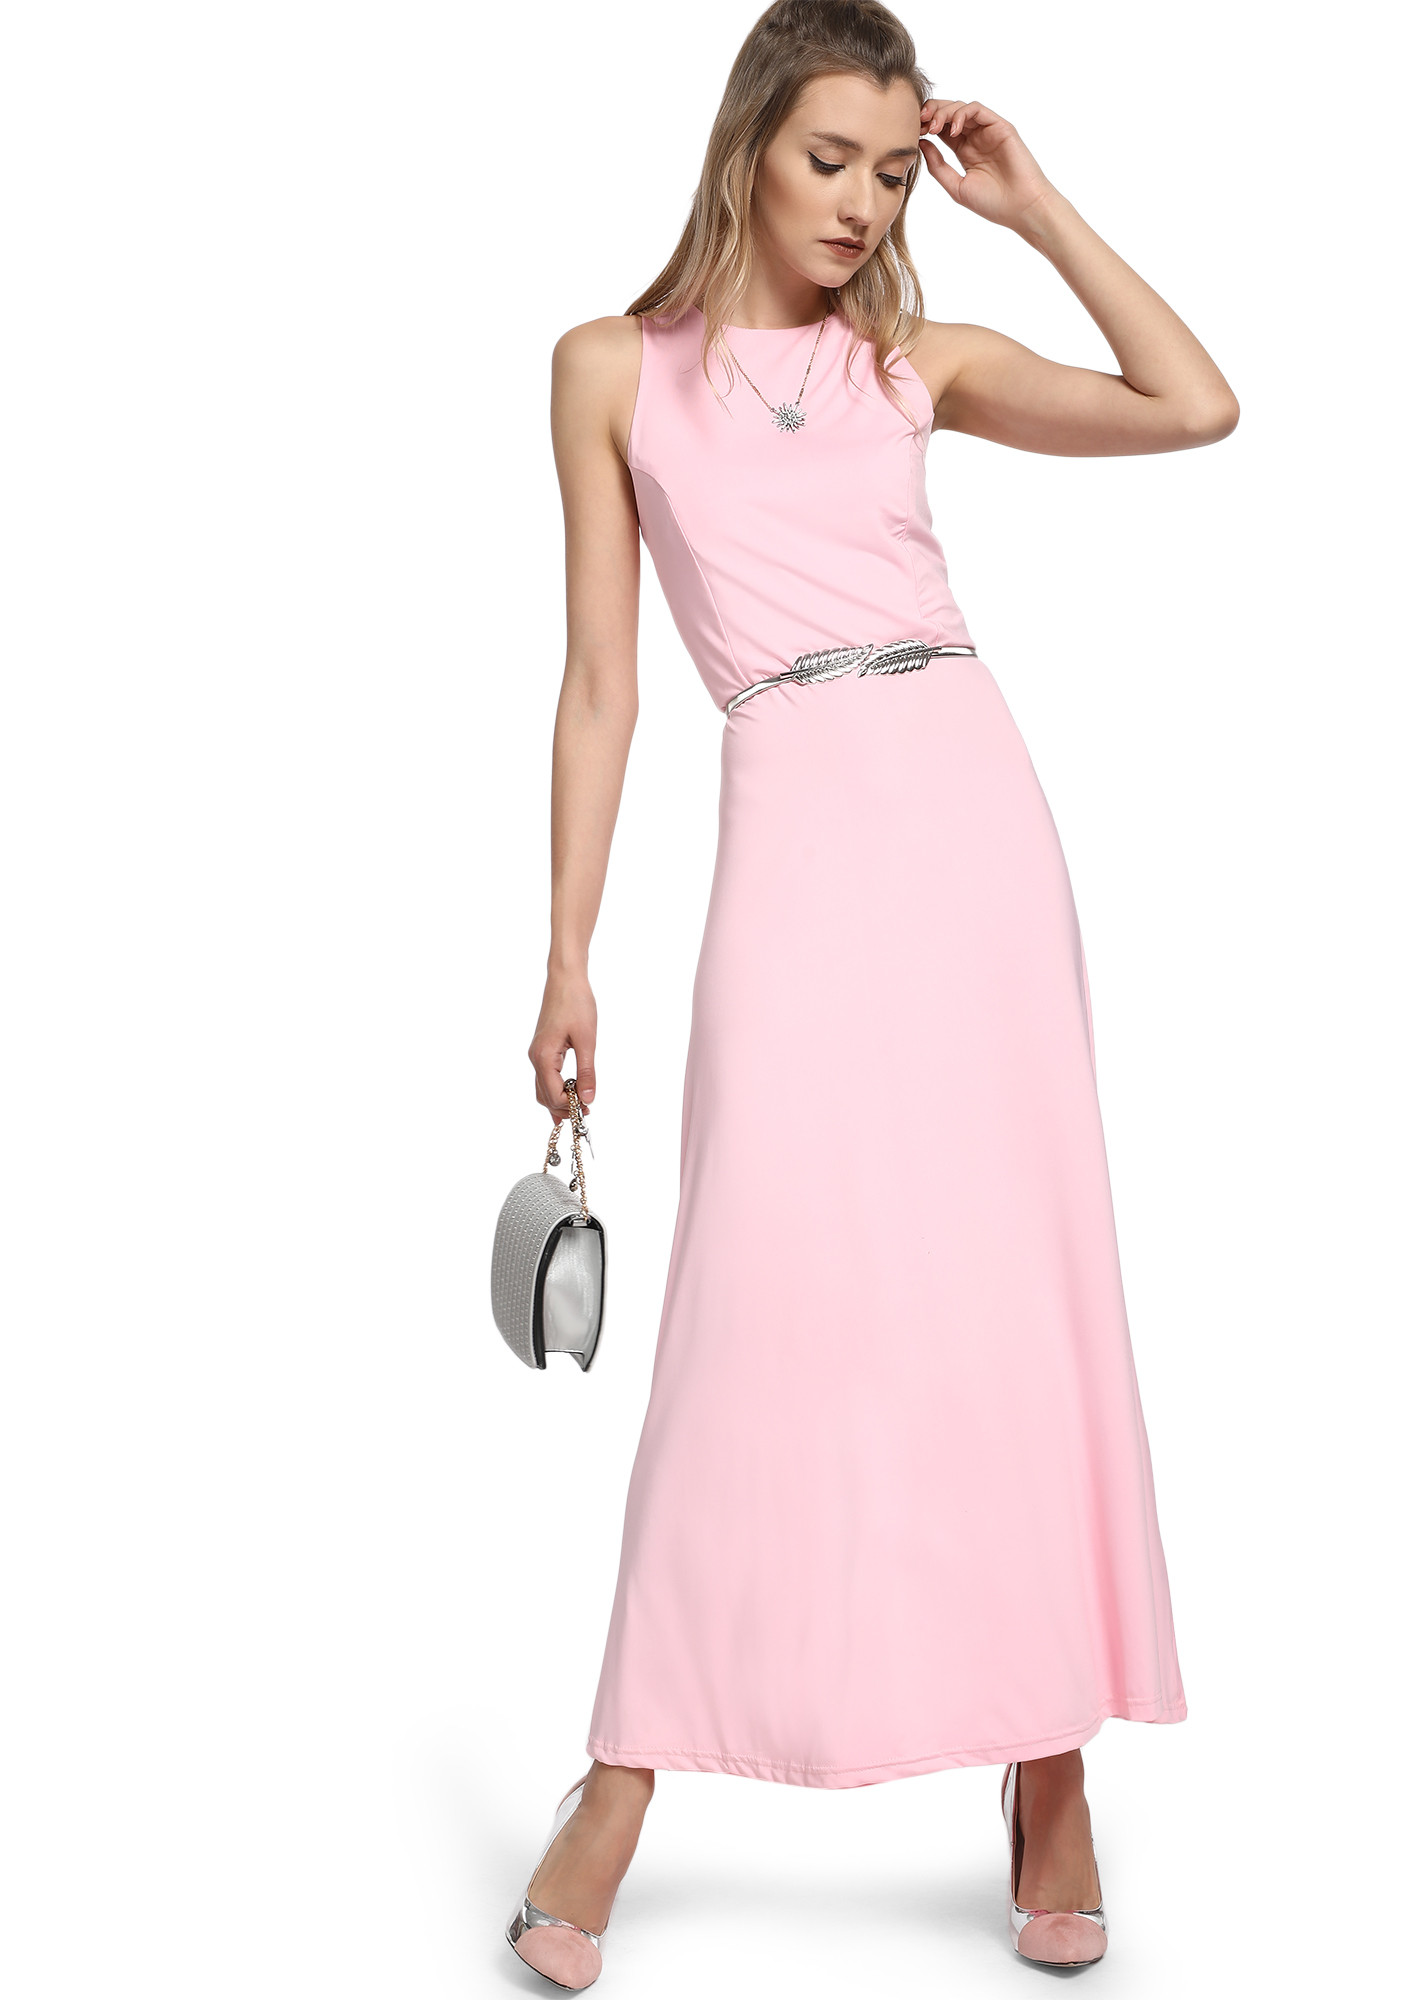 SEEING GOOD IN EVERYTHING PINK MAXI Dress